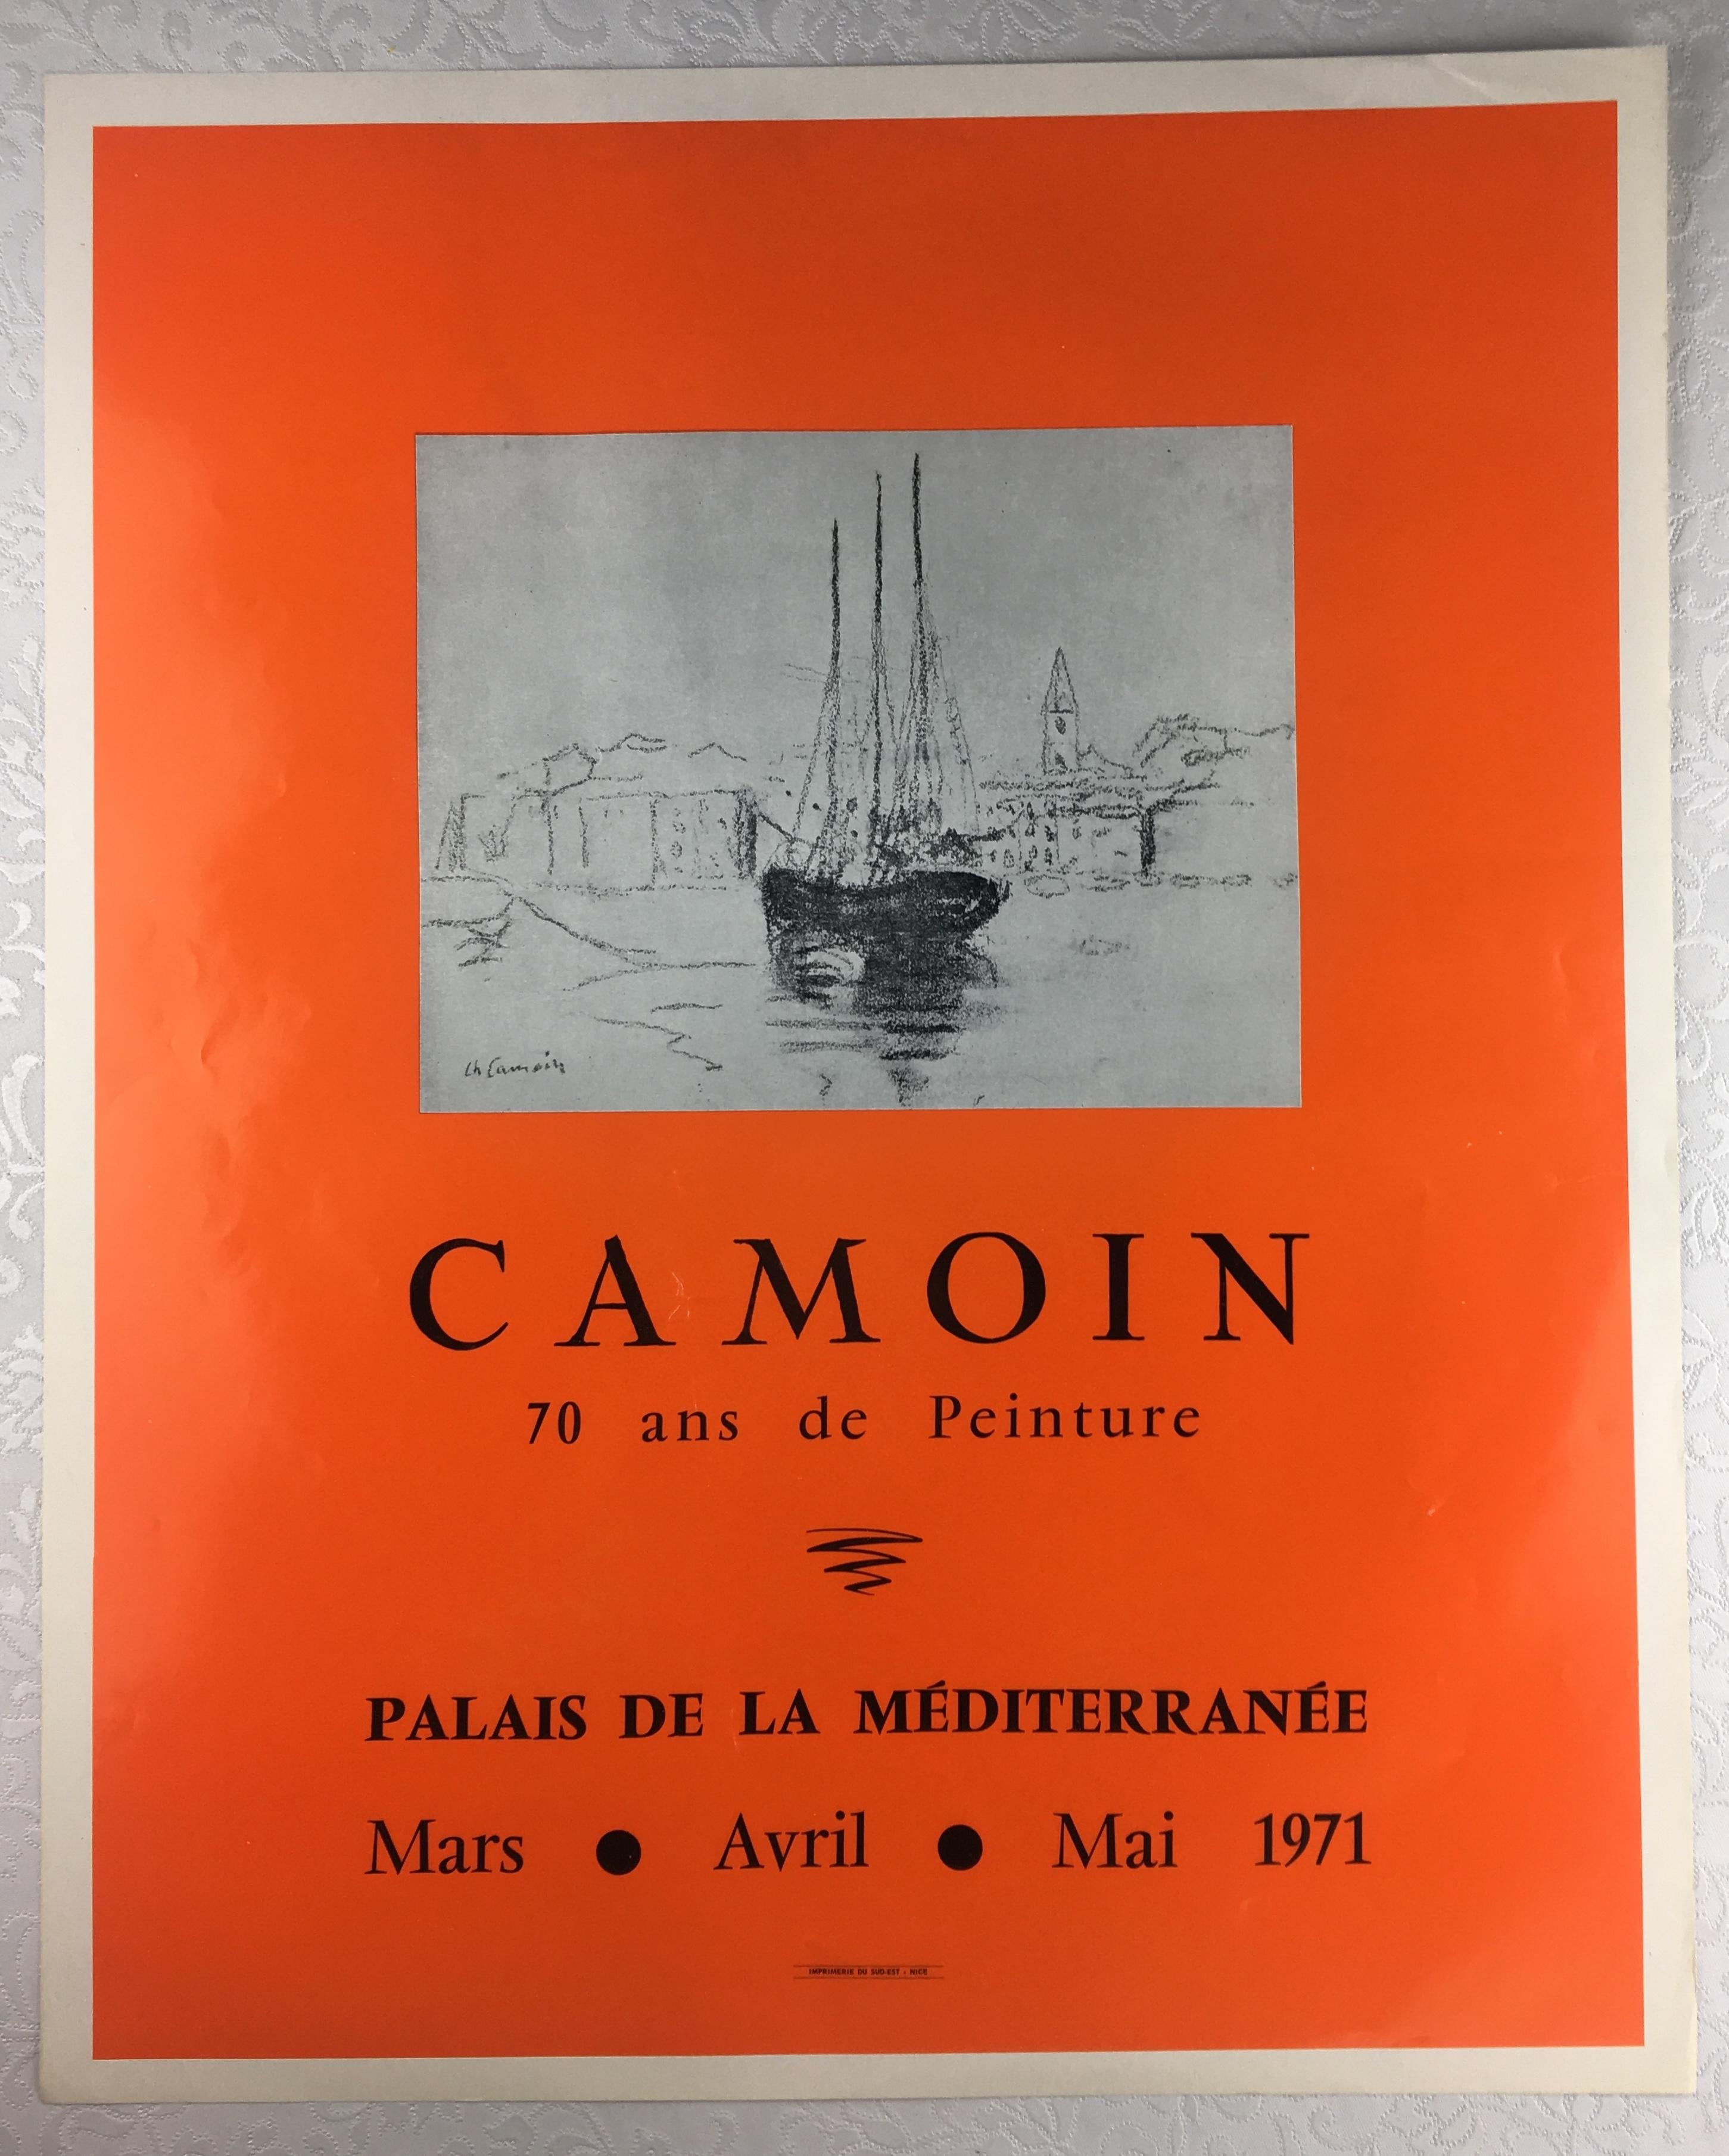 Original vintage poster from an exhibit of French painter, Charles Camoin, vivid orange color with beige highlights.

Charles Camoin (French: 23 September 1879-20 May 1965) was a French Expressionist landscape painter associated with the Fauves.